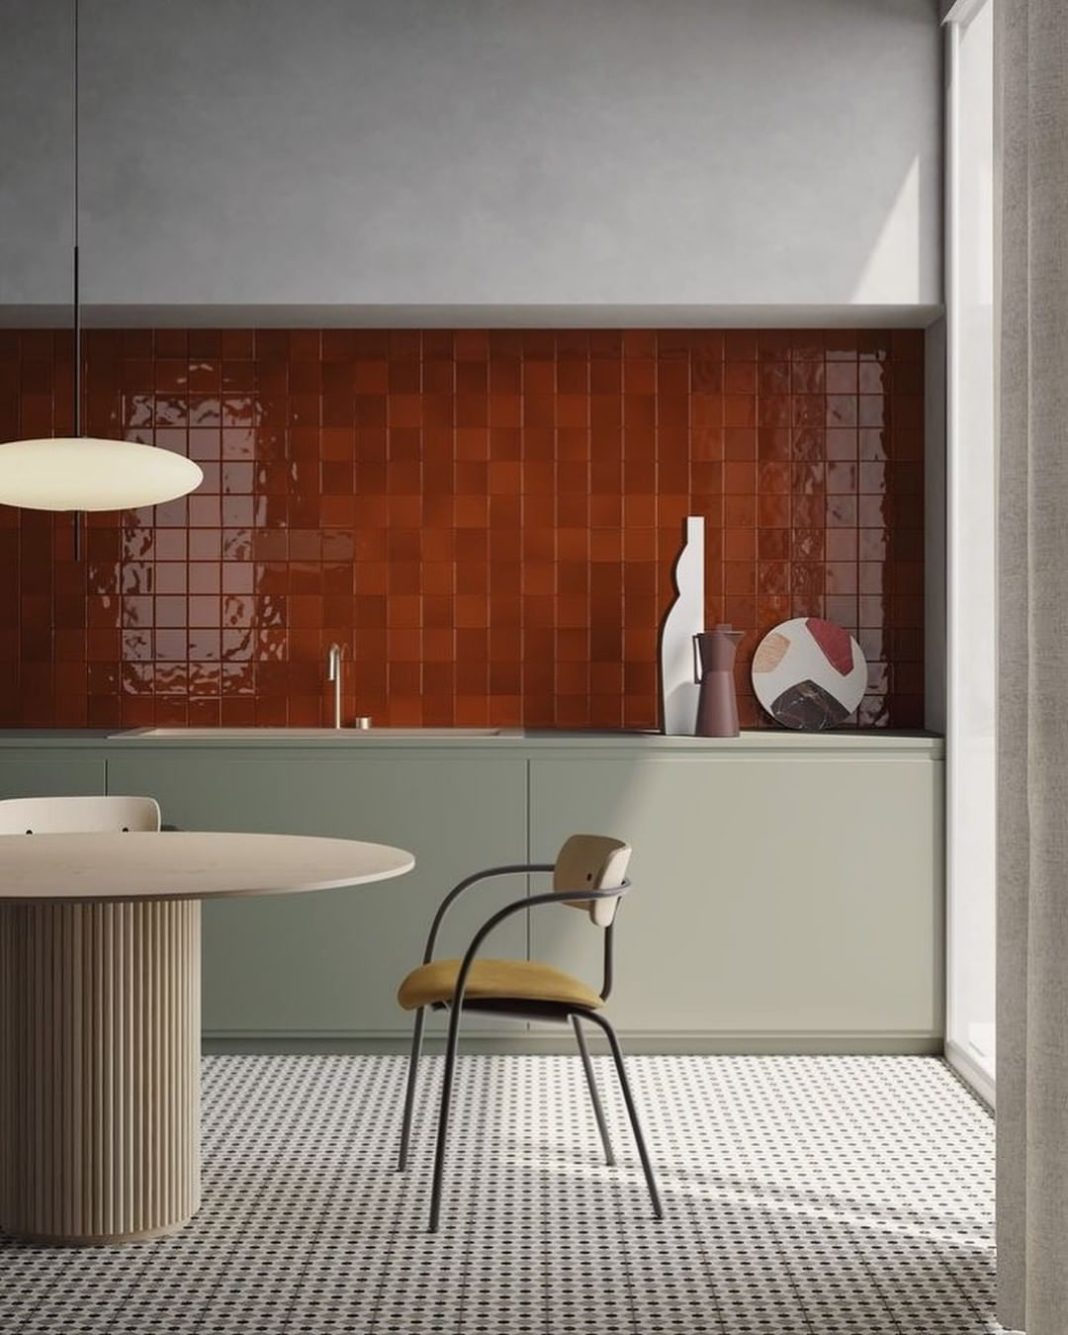 INTERIOR TRENDS Zellige tiles as a top decor trend for 2020